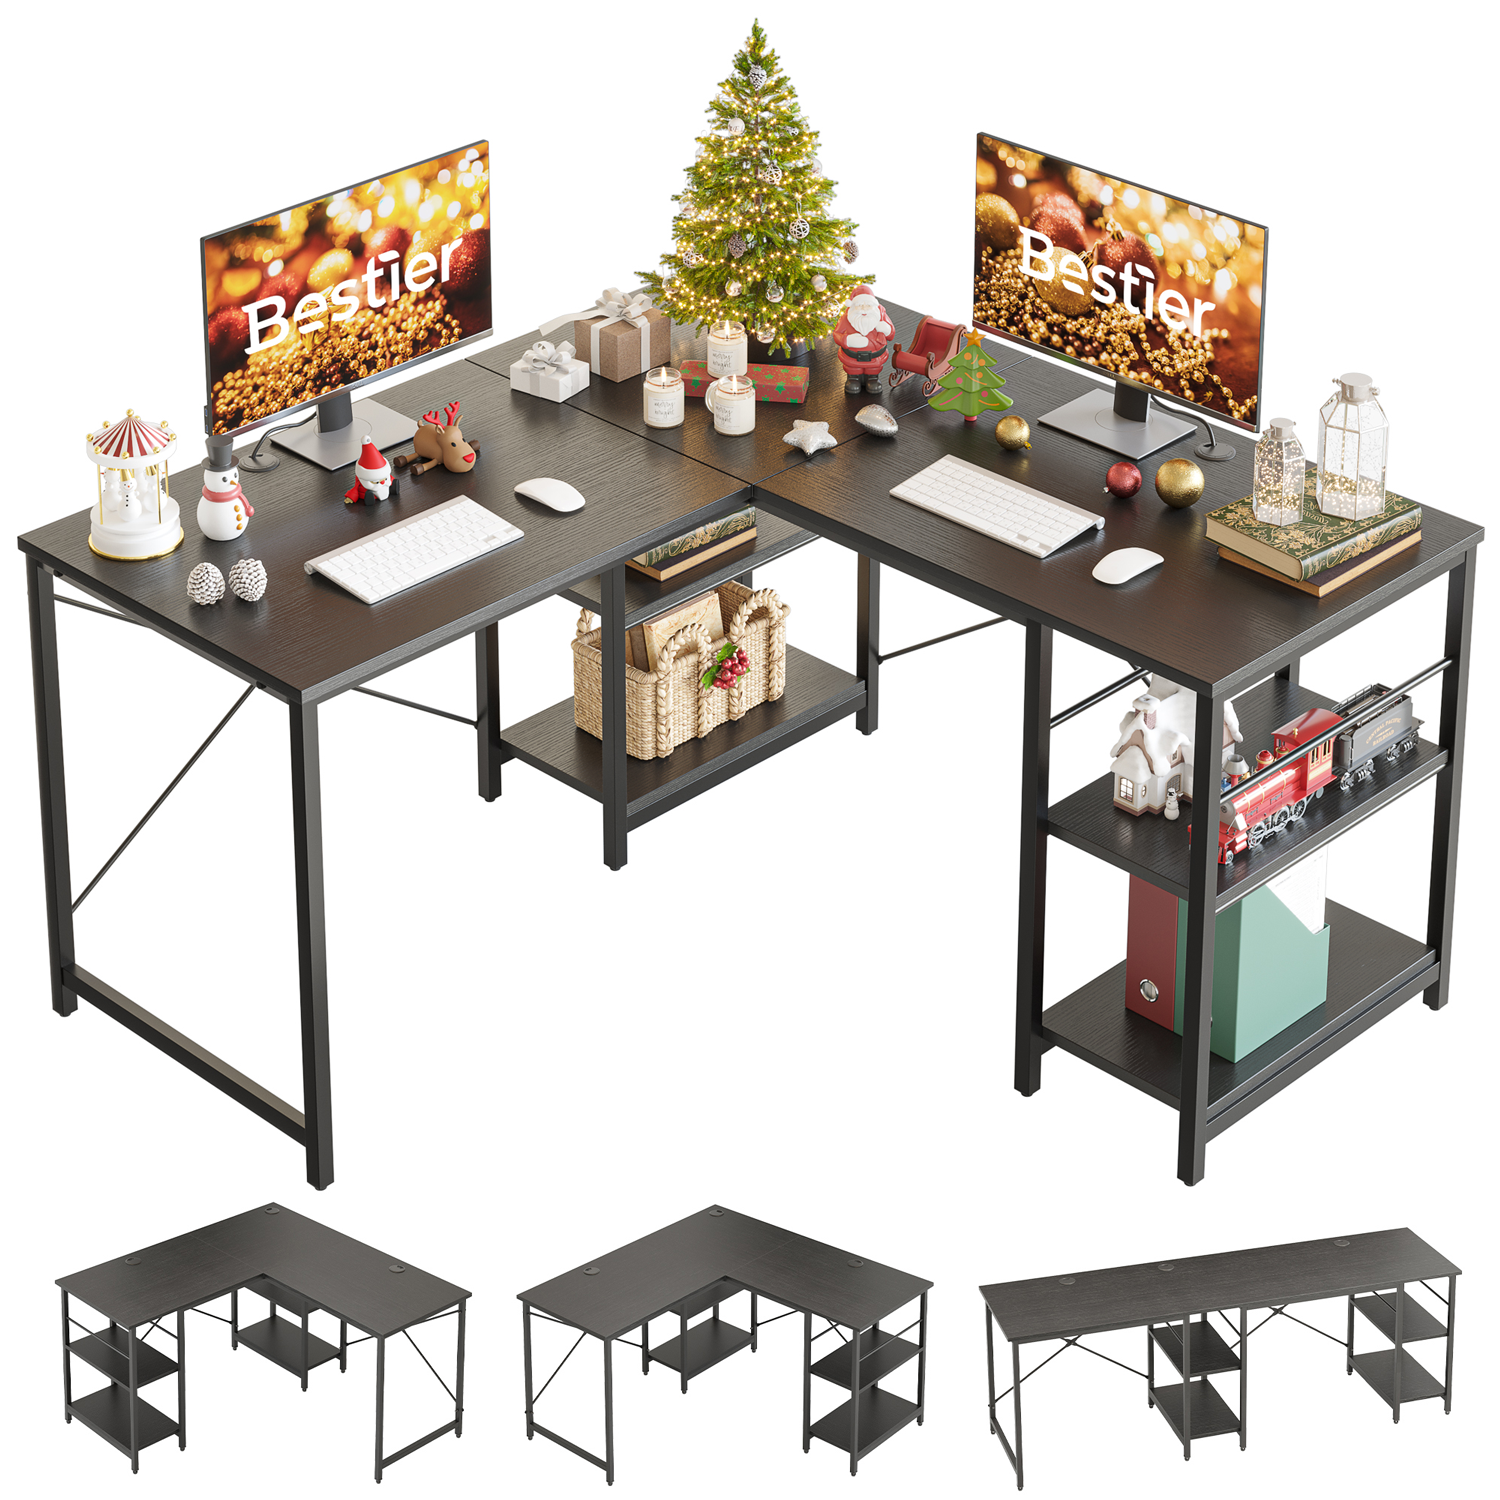 Bestier 86.6 inch L Shaped Desk with Shelves 2 Person Long Table Black - image 1 of 9